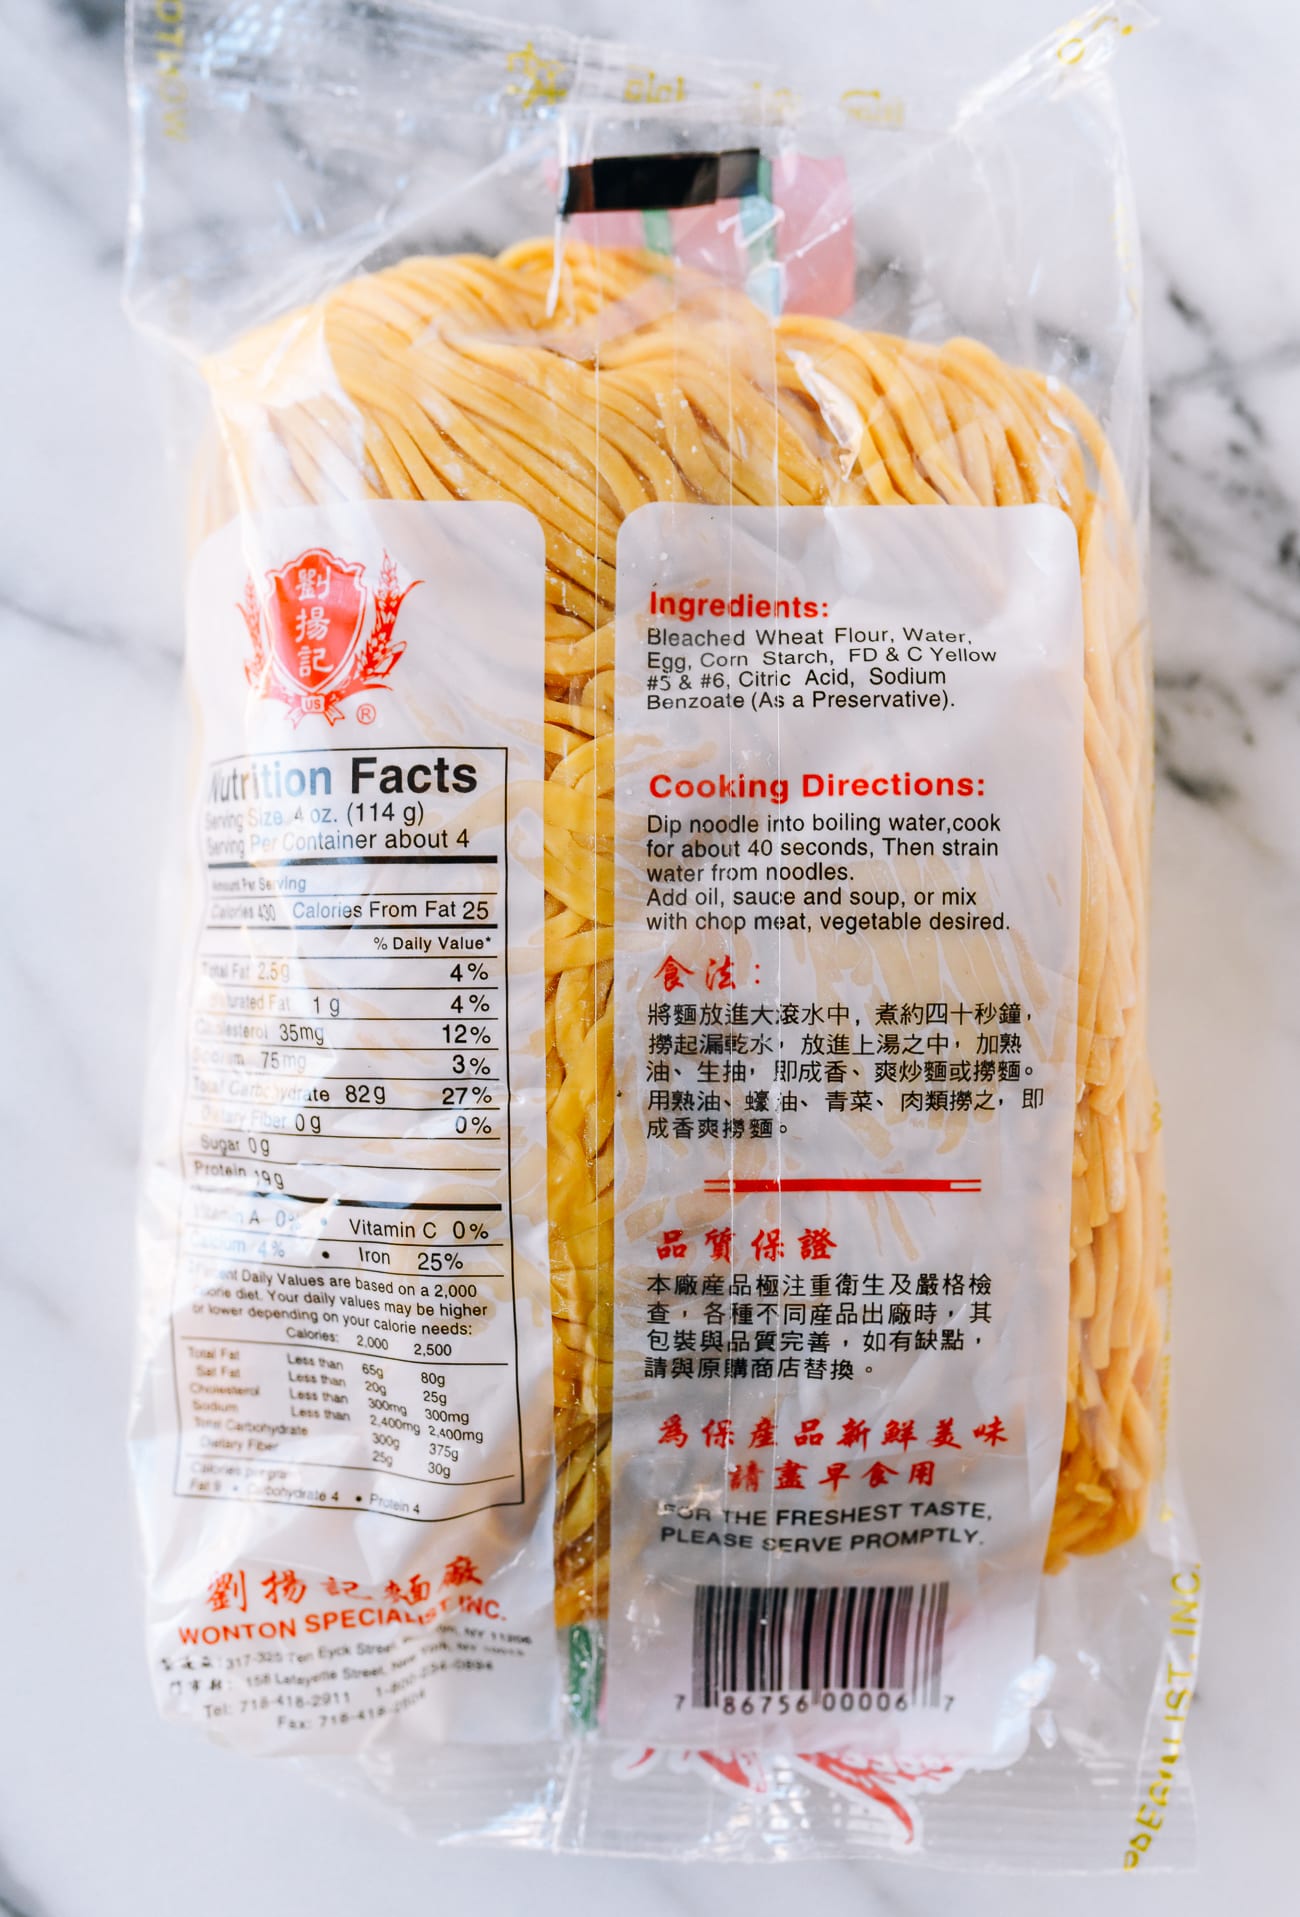 nutrition information and cooking instruction on package of raw lo mein noodles